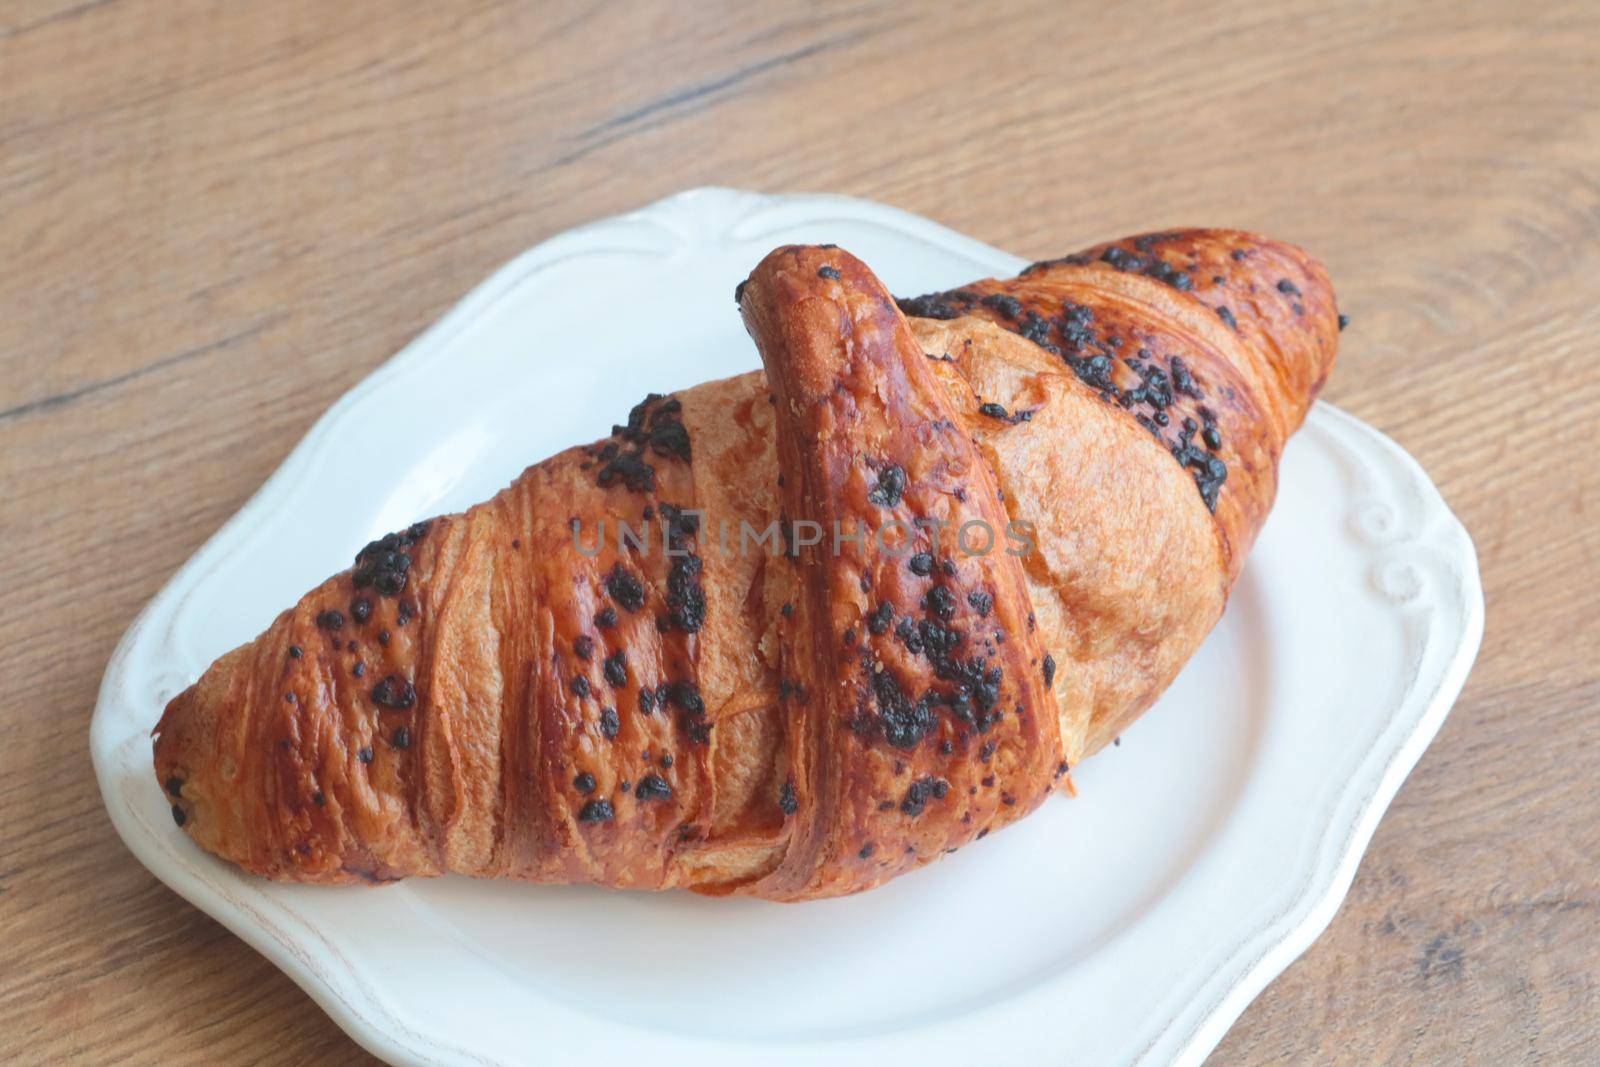 There is a delicious and fresh croissant on the plate. Fresh bakery. Sweets for tea or coffee. Bakery with fresh pastries. Food concept